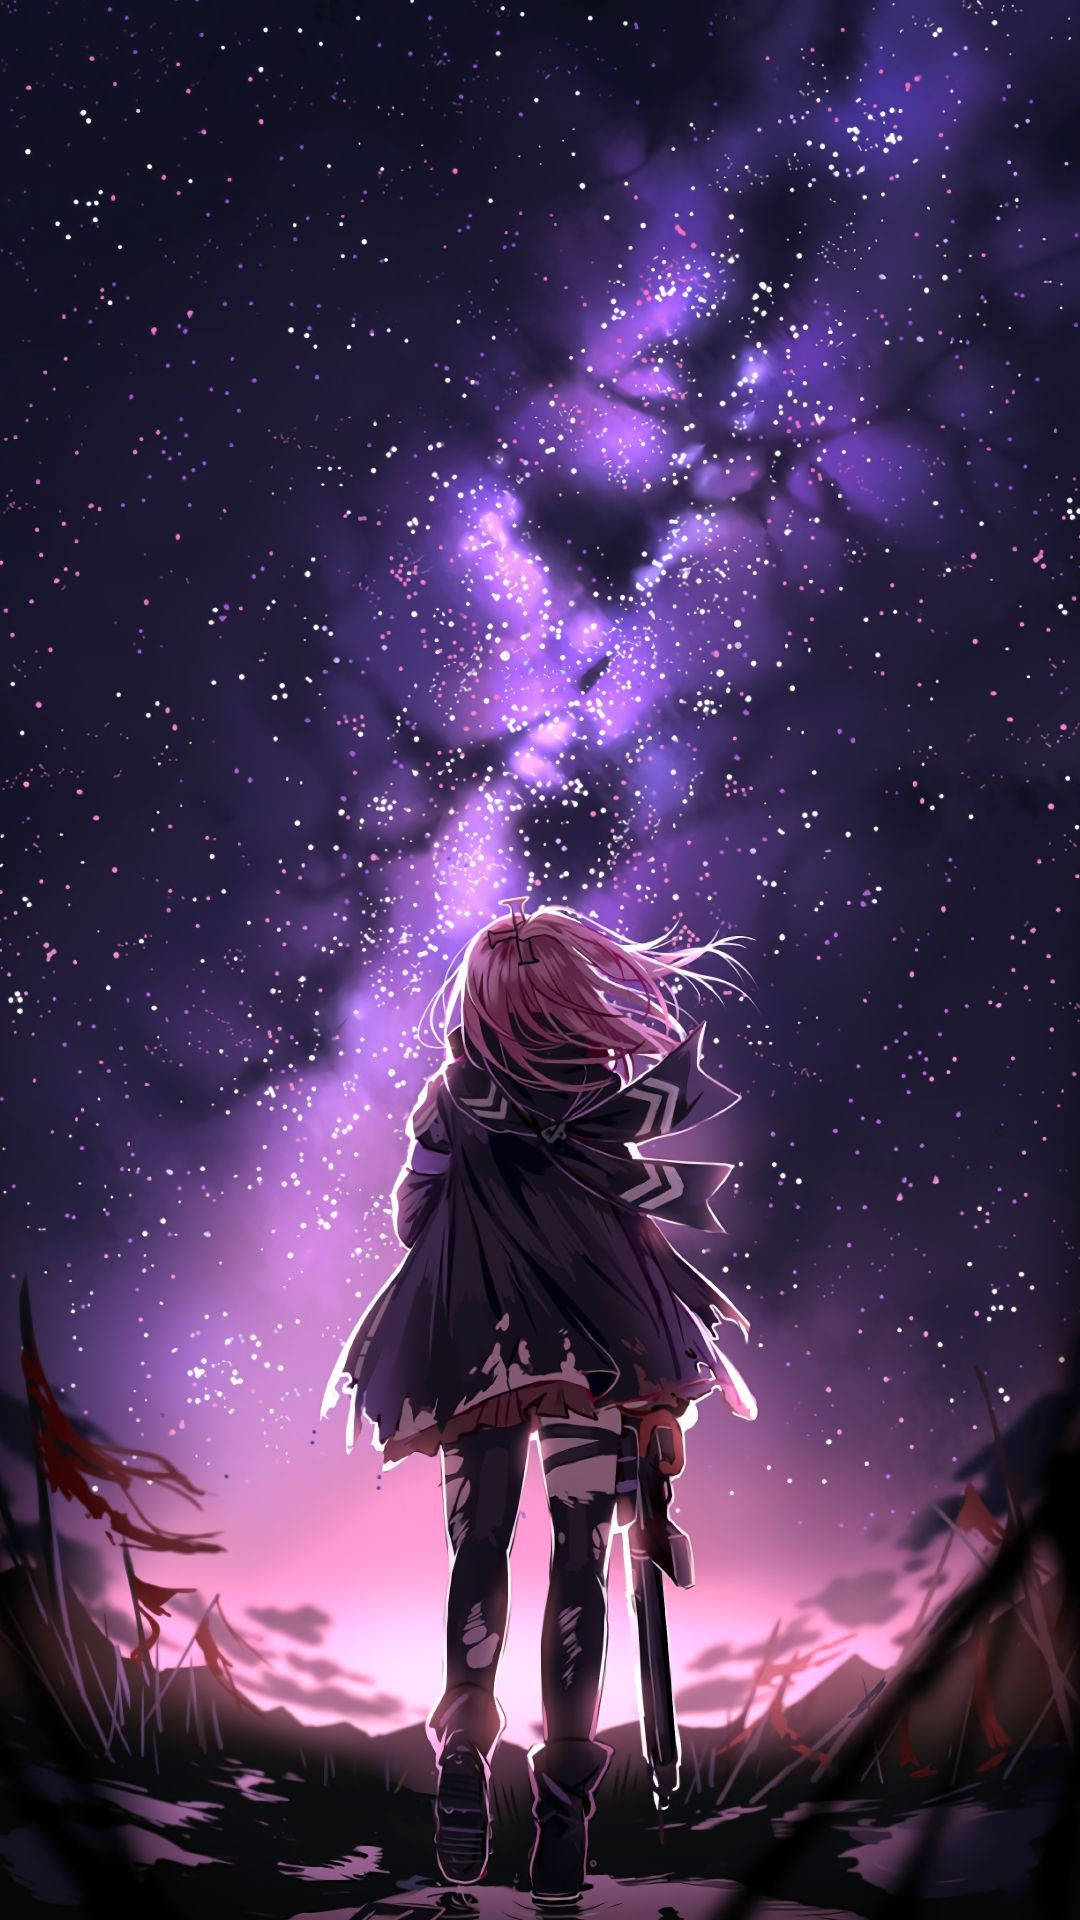 Download Cool Galaxy Anime Girl Wallpaper | Wallpapers.com